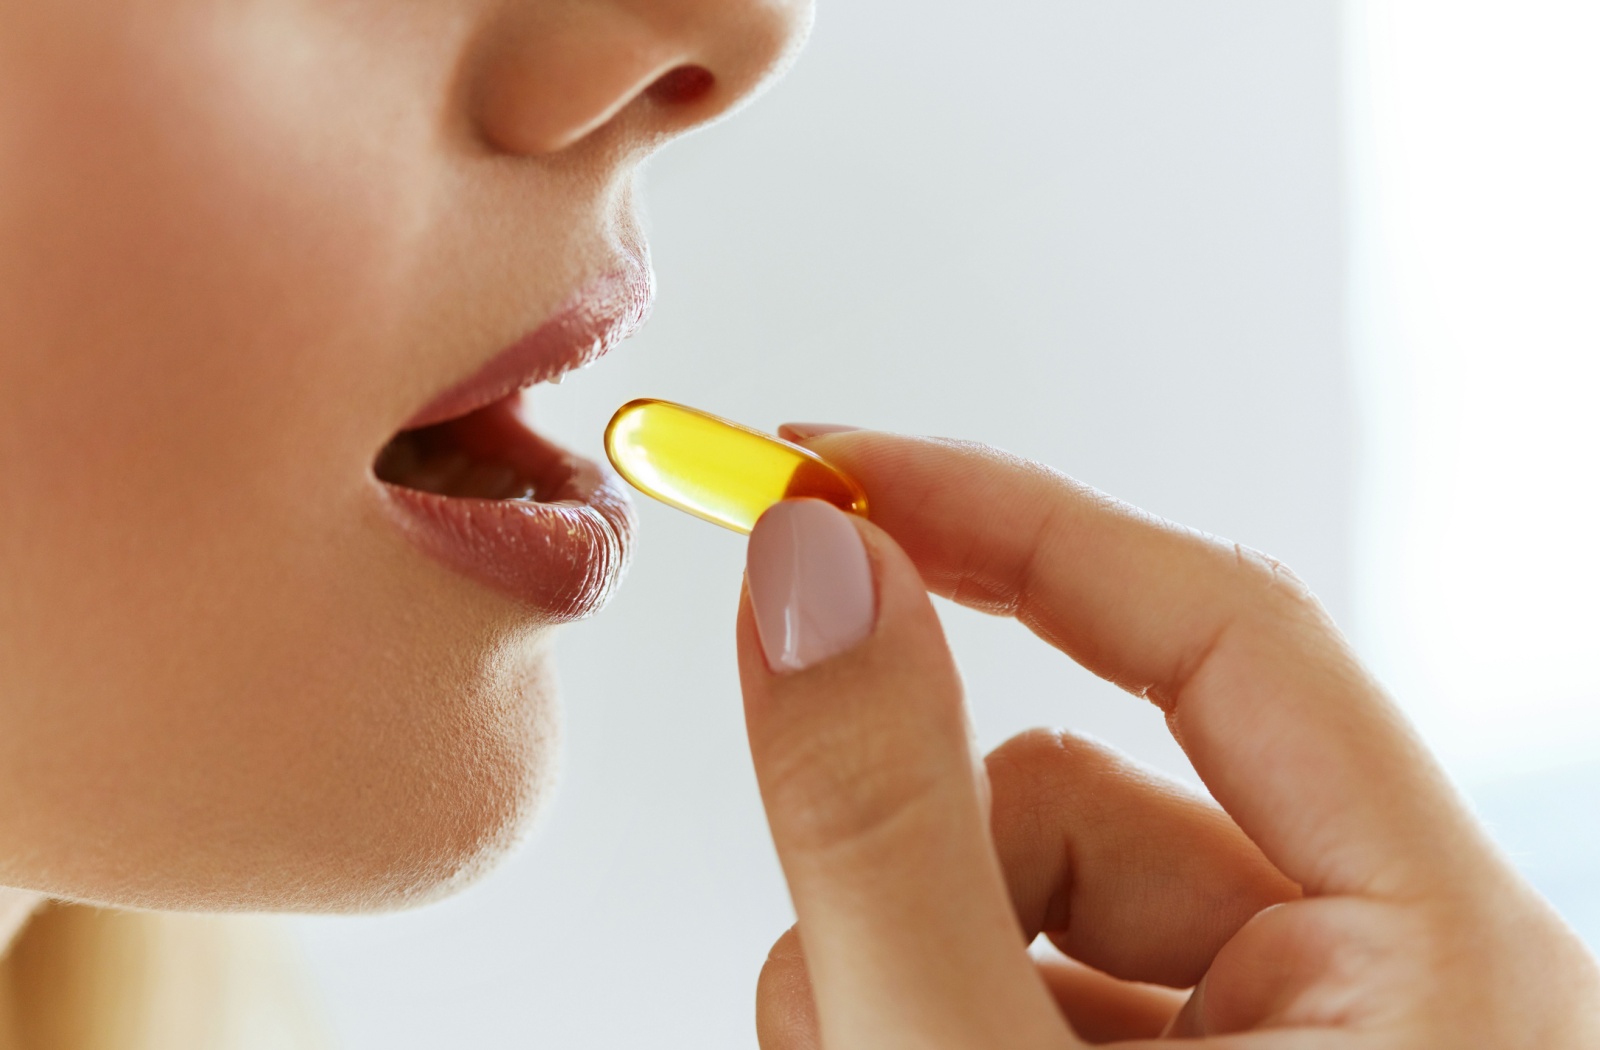 A close-up of a woman taking a vitamin A supplement.
